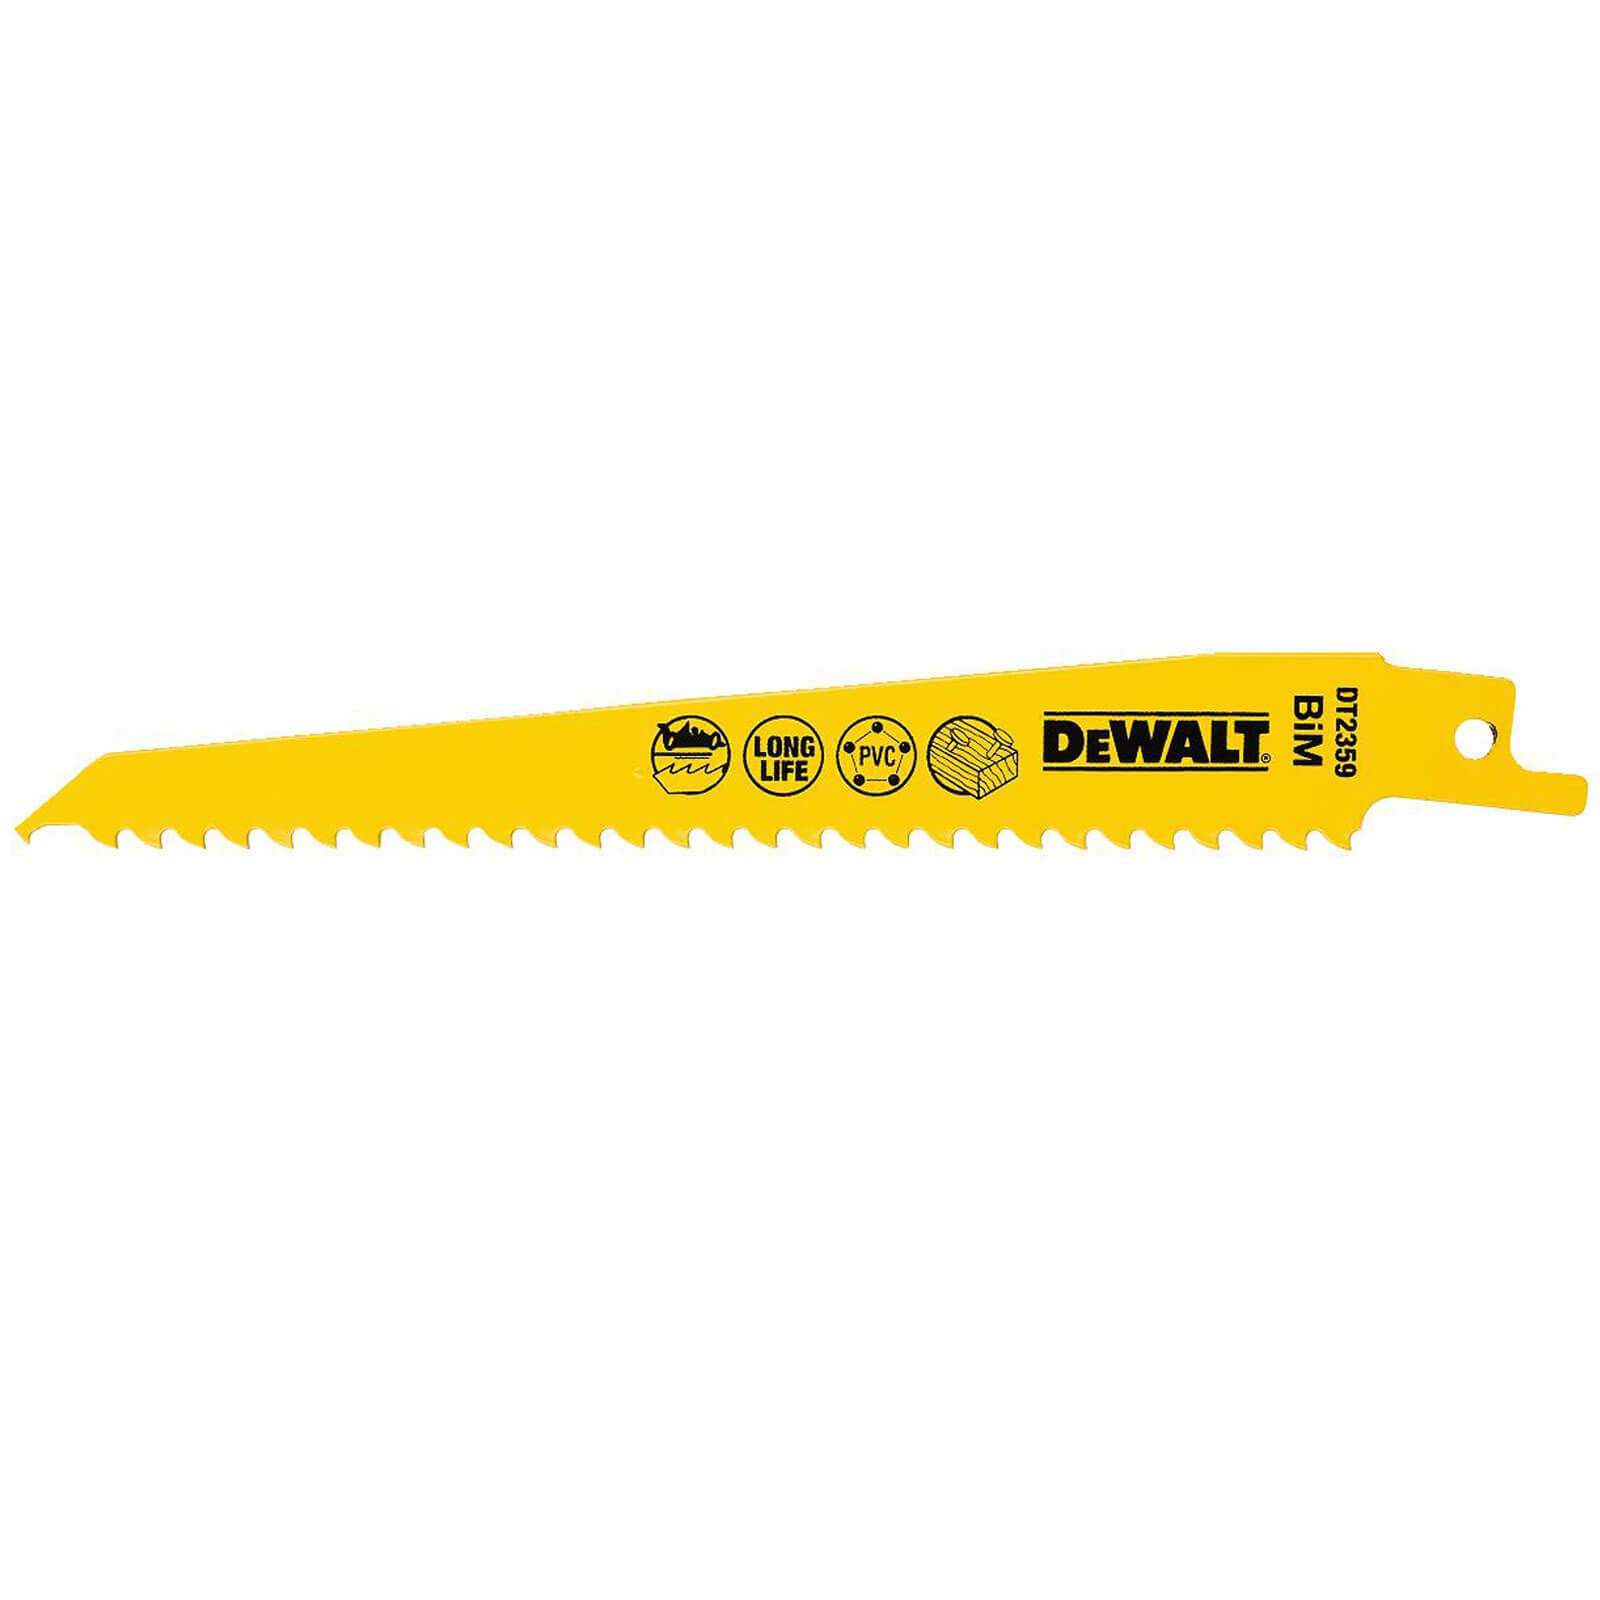 Photos - Power Tool Accessory DeWALT HSC Fast Cuts Wood and Nails Reciprocating Sabre Saw Blades 152mm P 